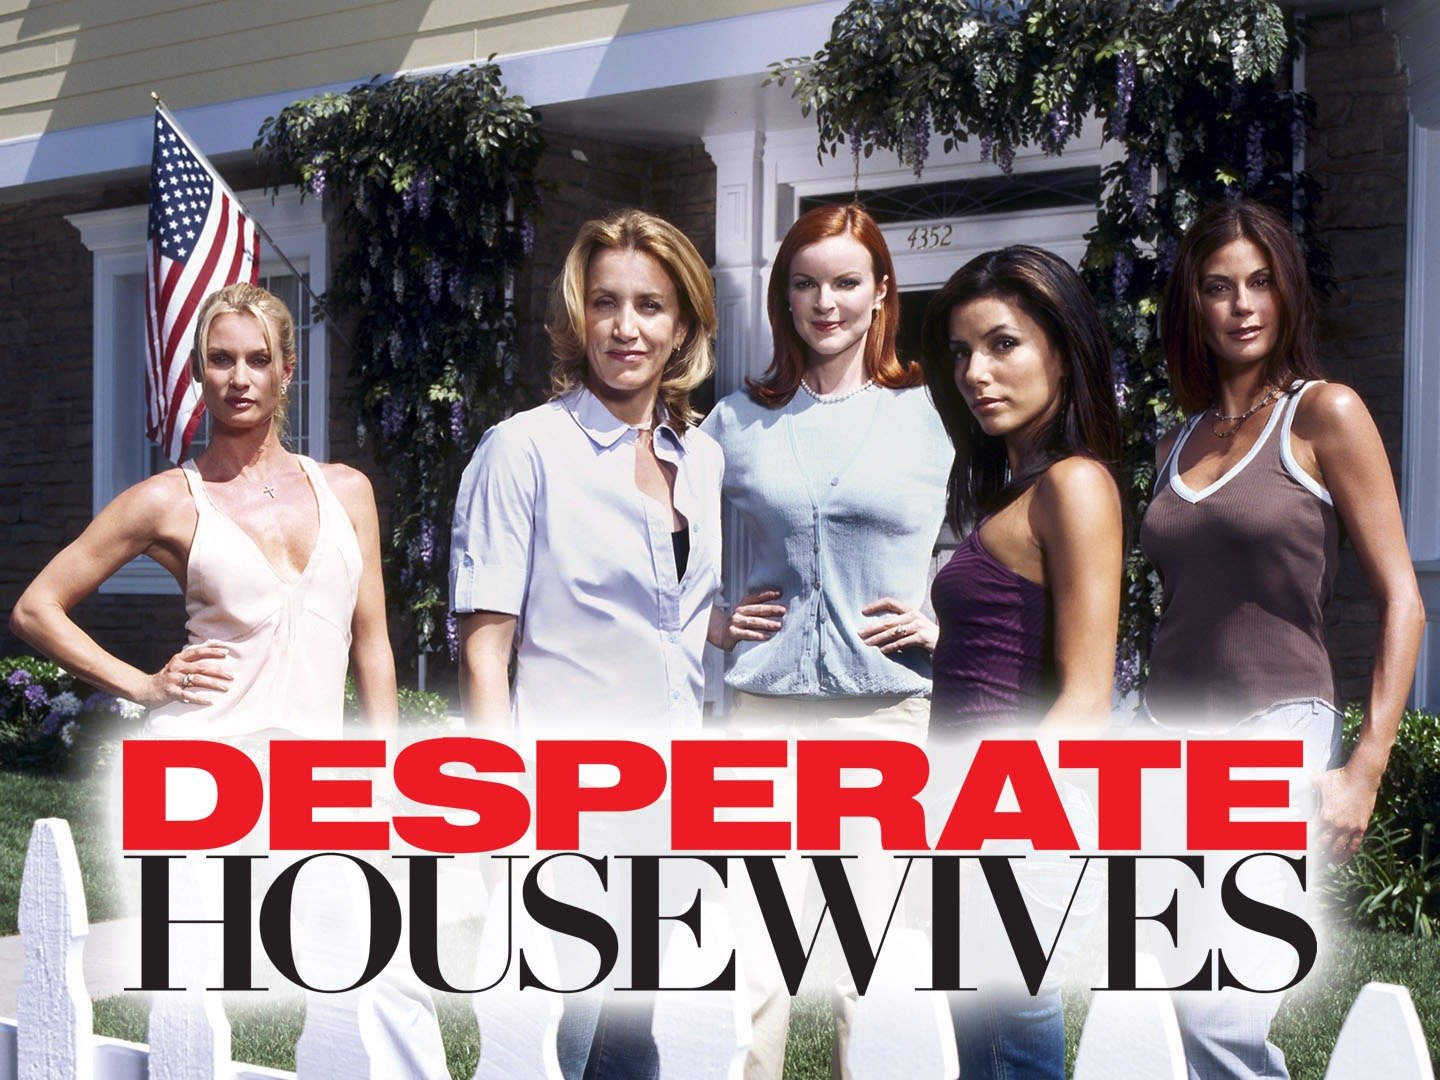 Desperate Housewives photo image